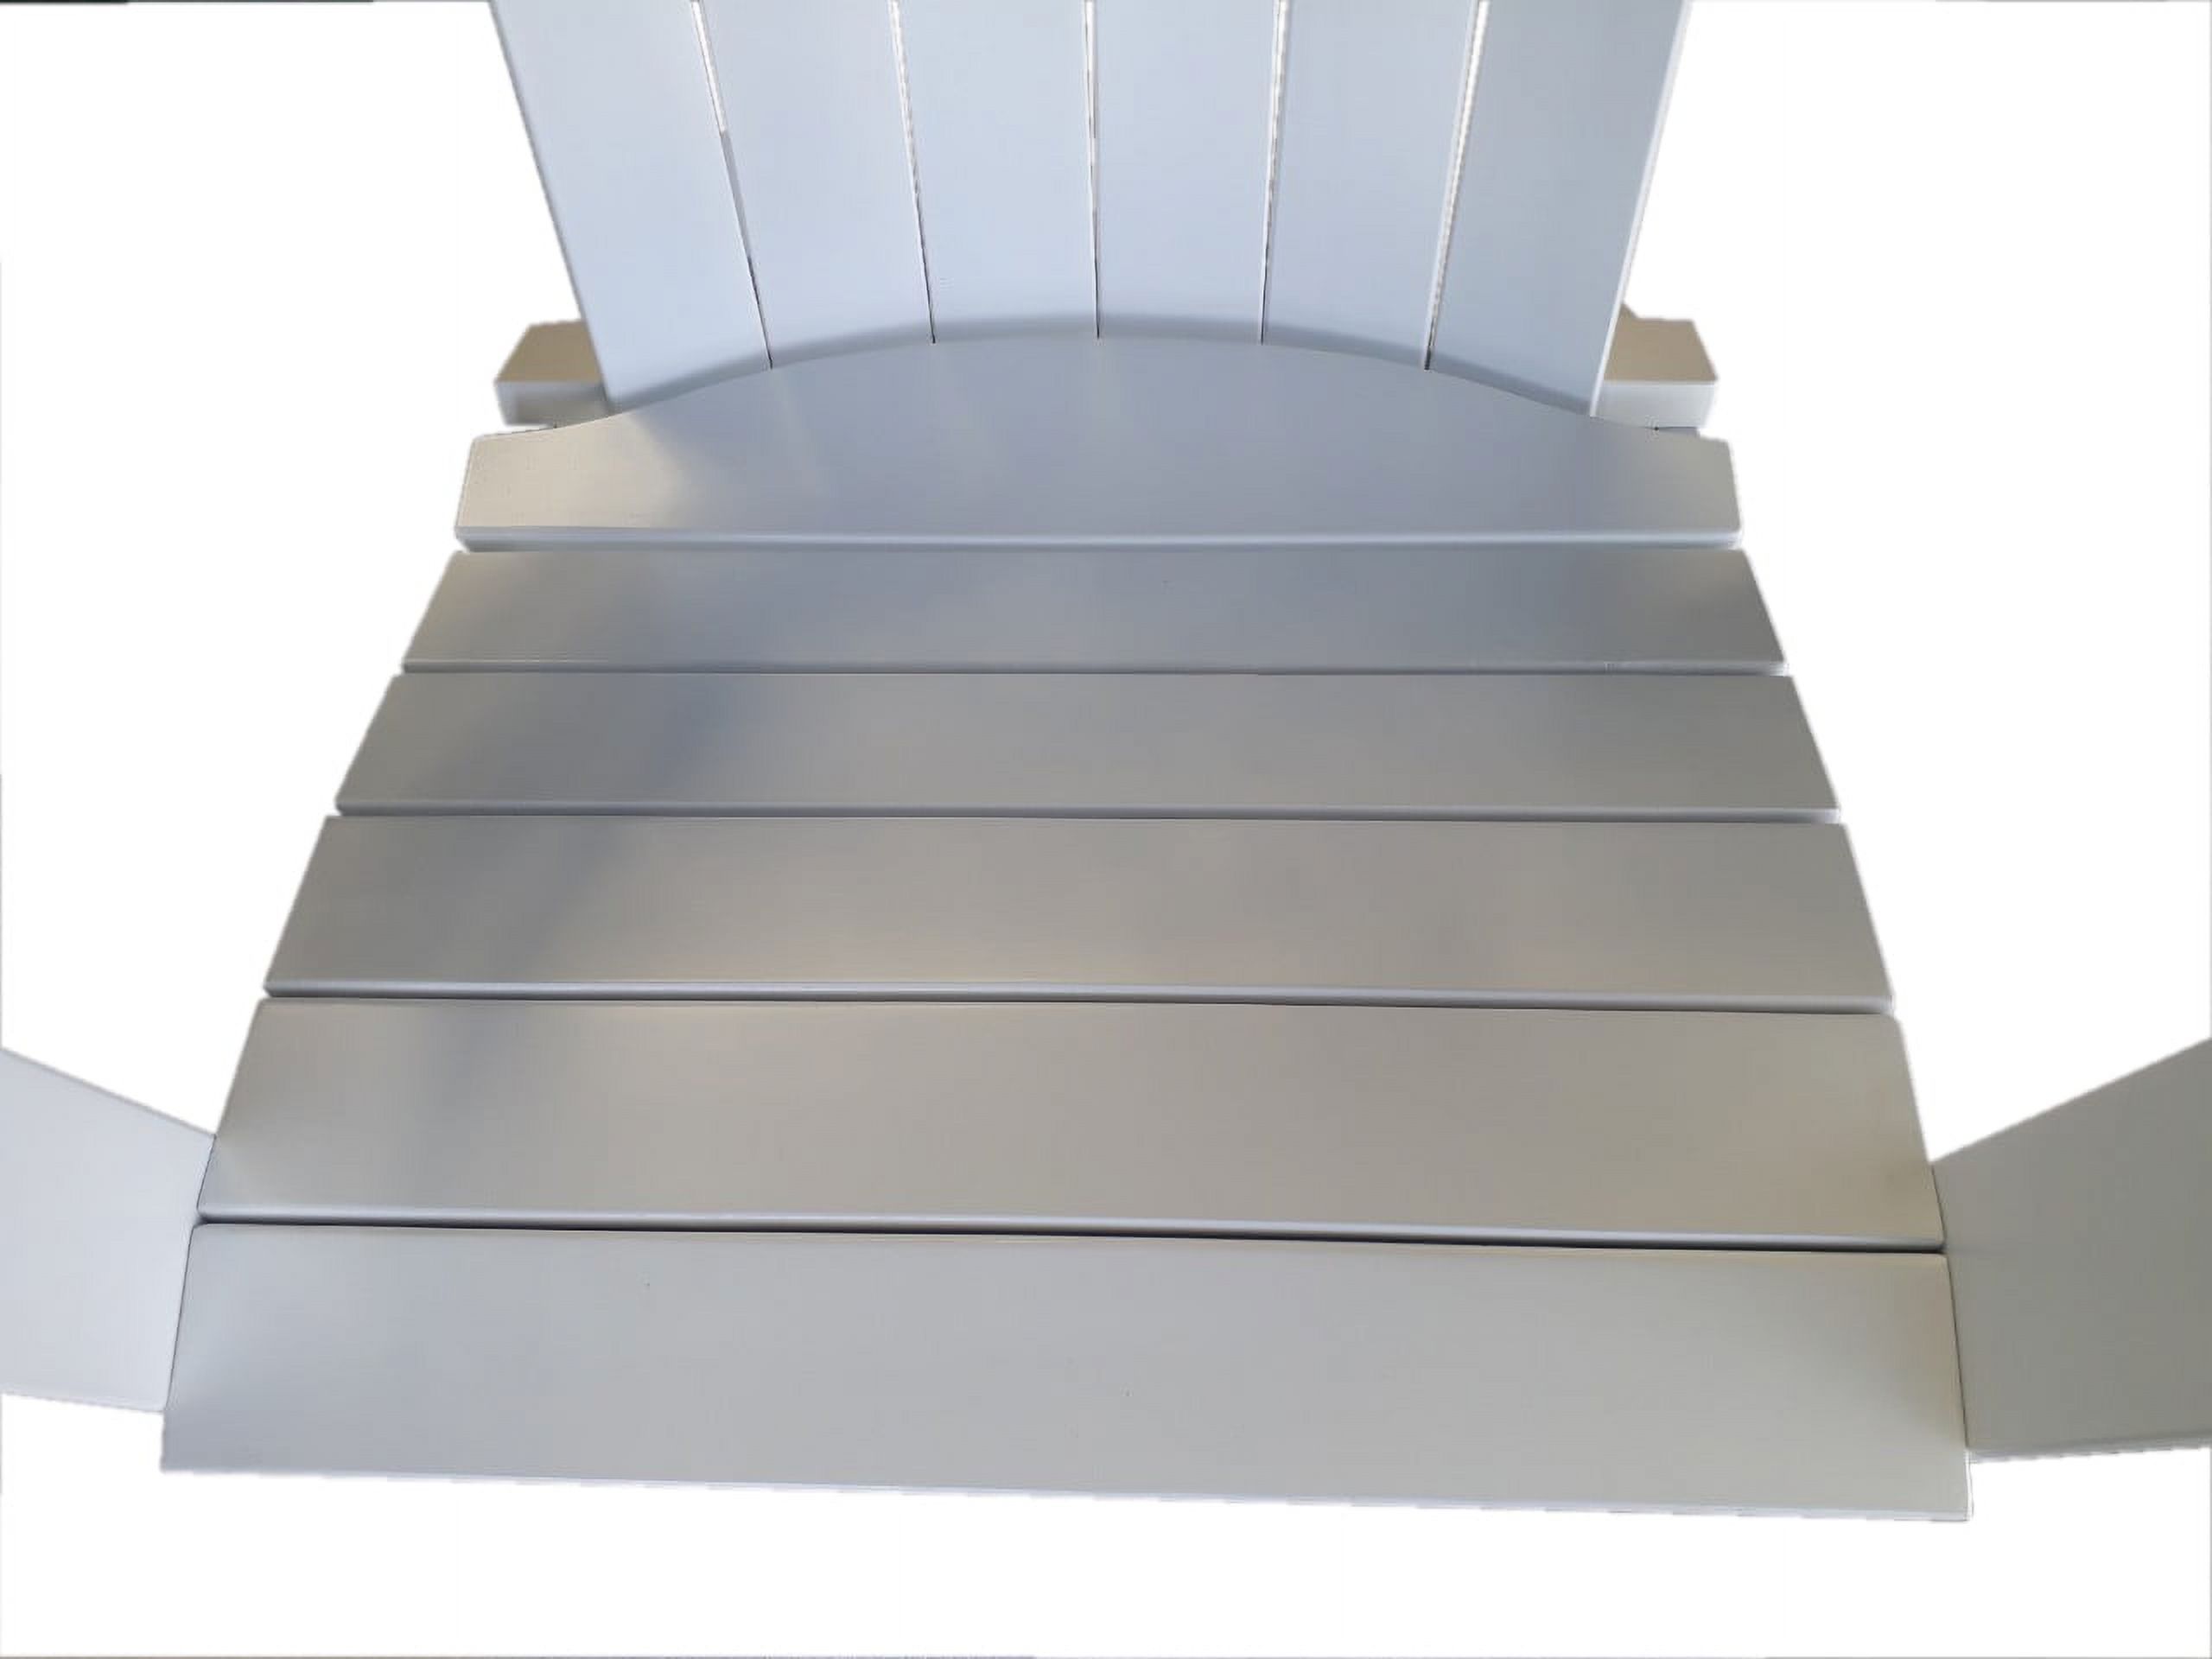 Mainstays Wood Outdoor Adirondack Chair, White Color - image 3 of 8